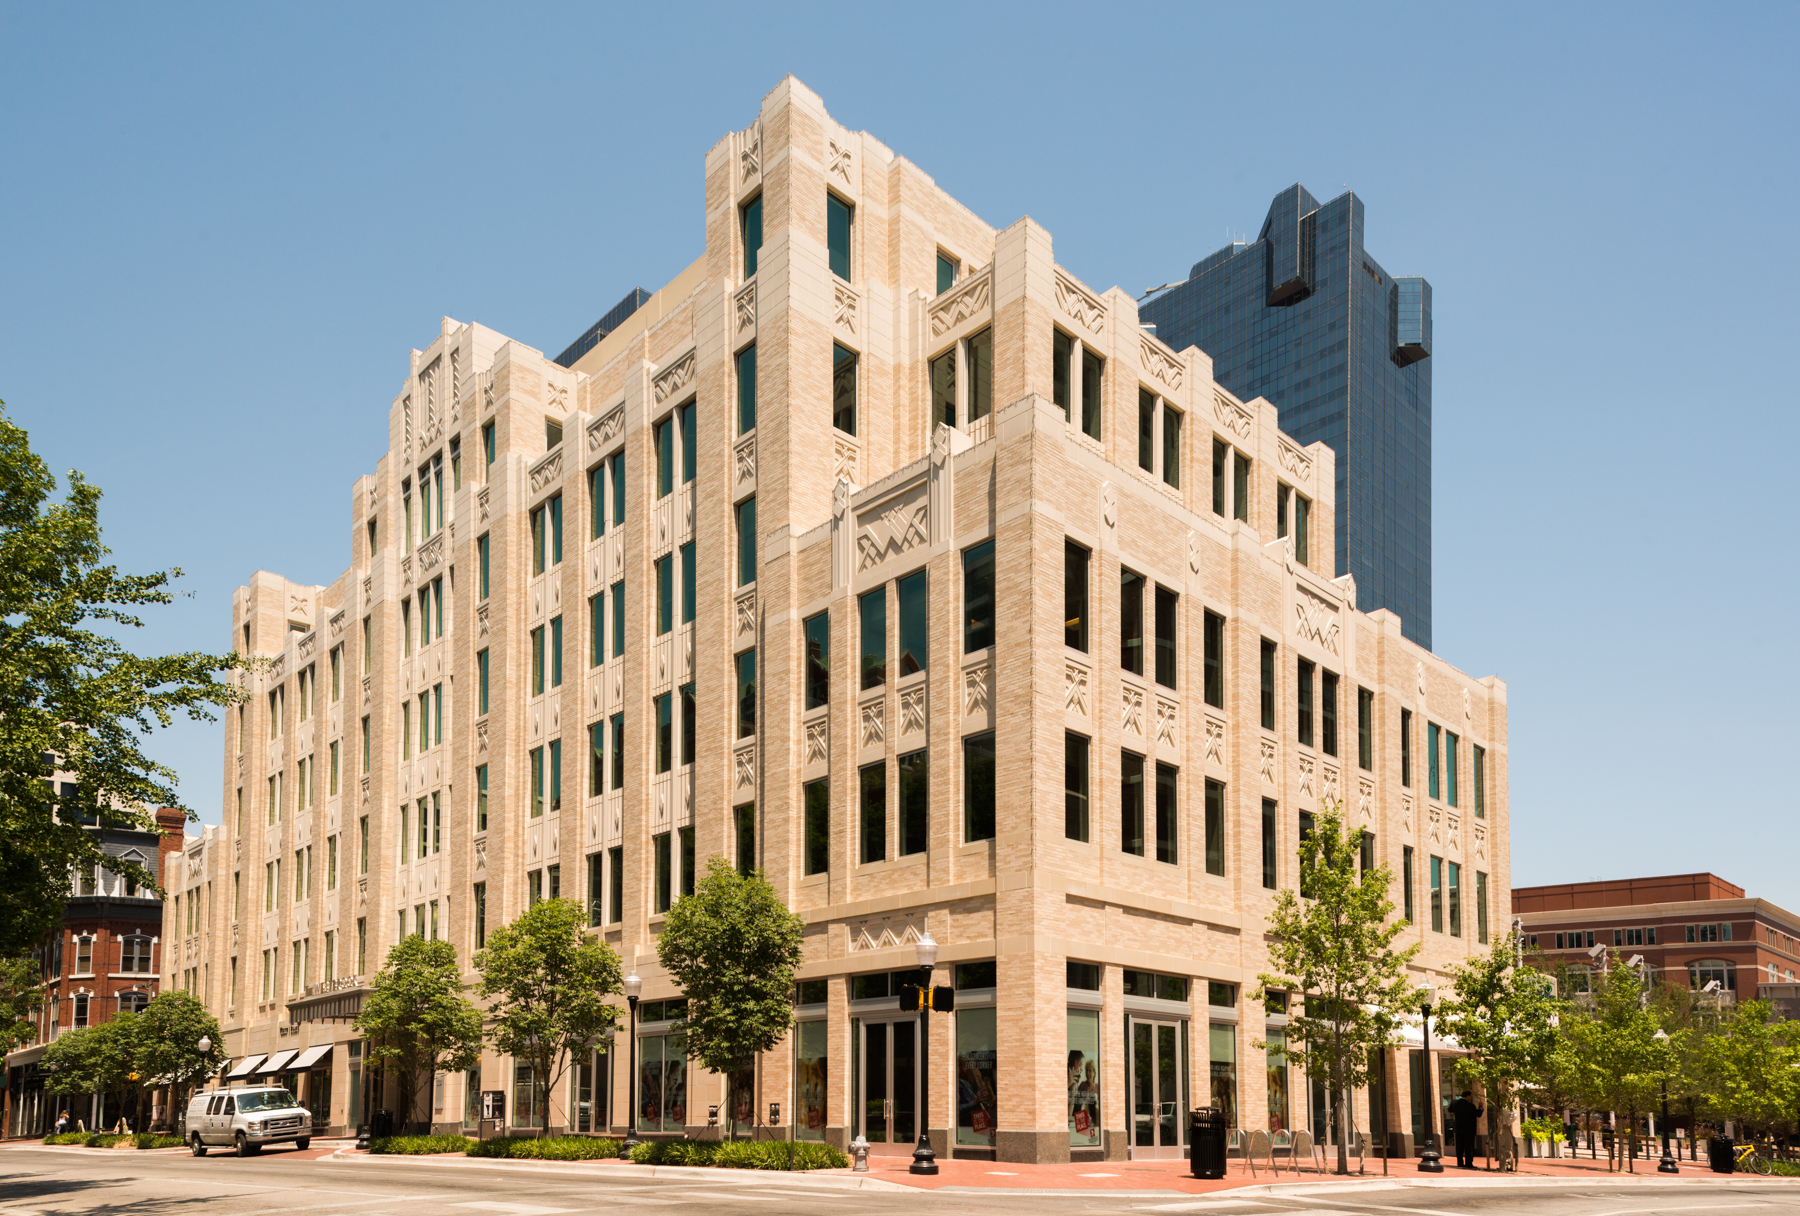 Sundance Square's Westbrook Building Won Best in Class for the 2014 Brick in Architecture competition.